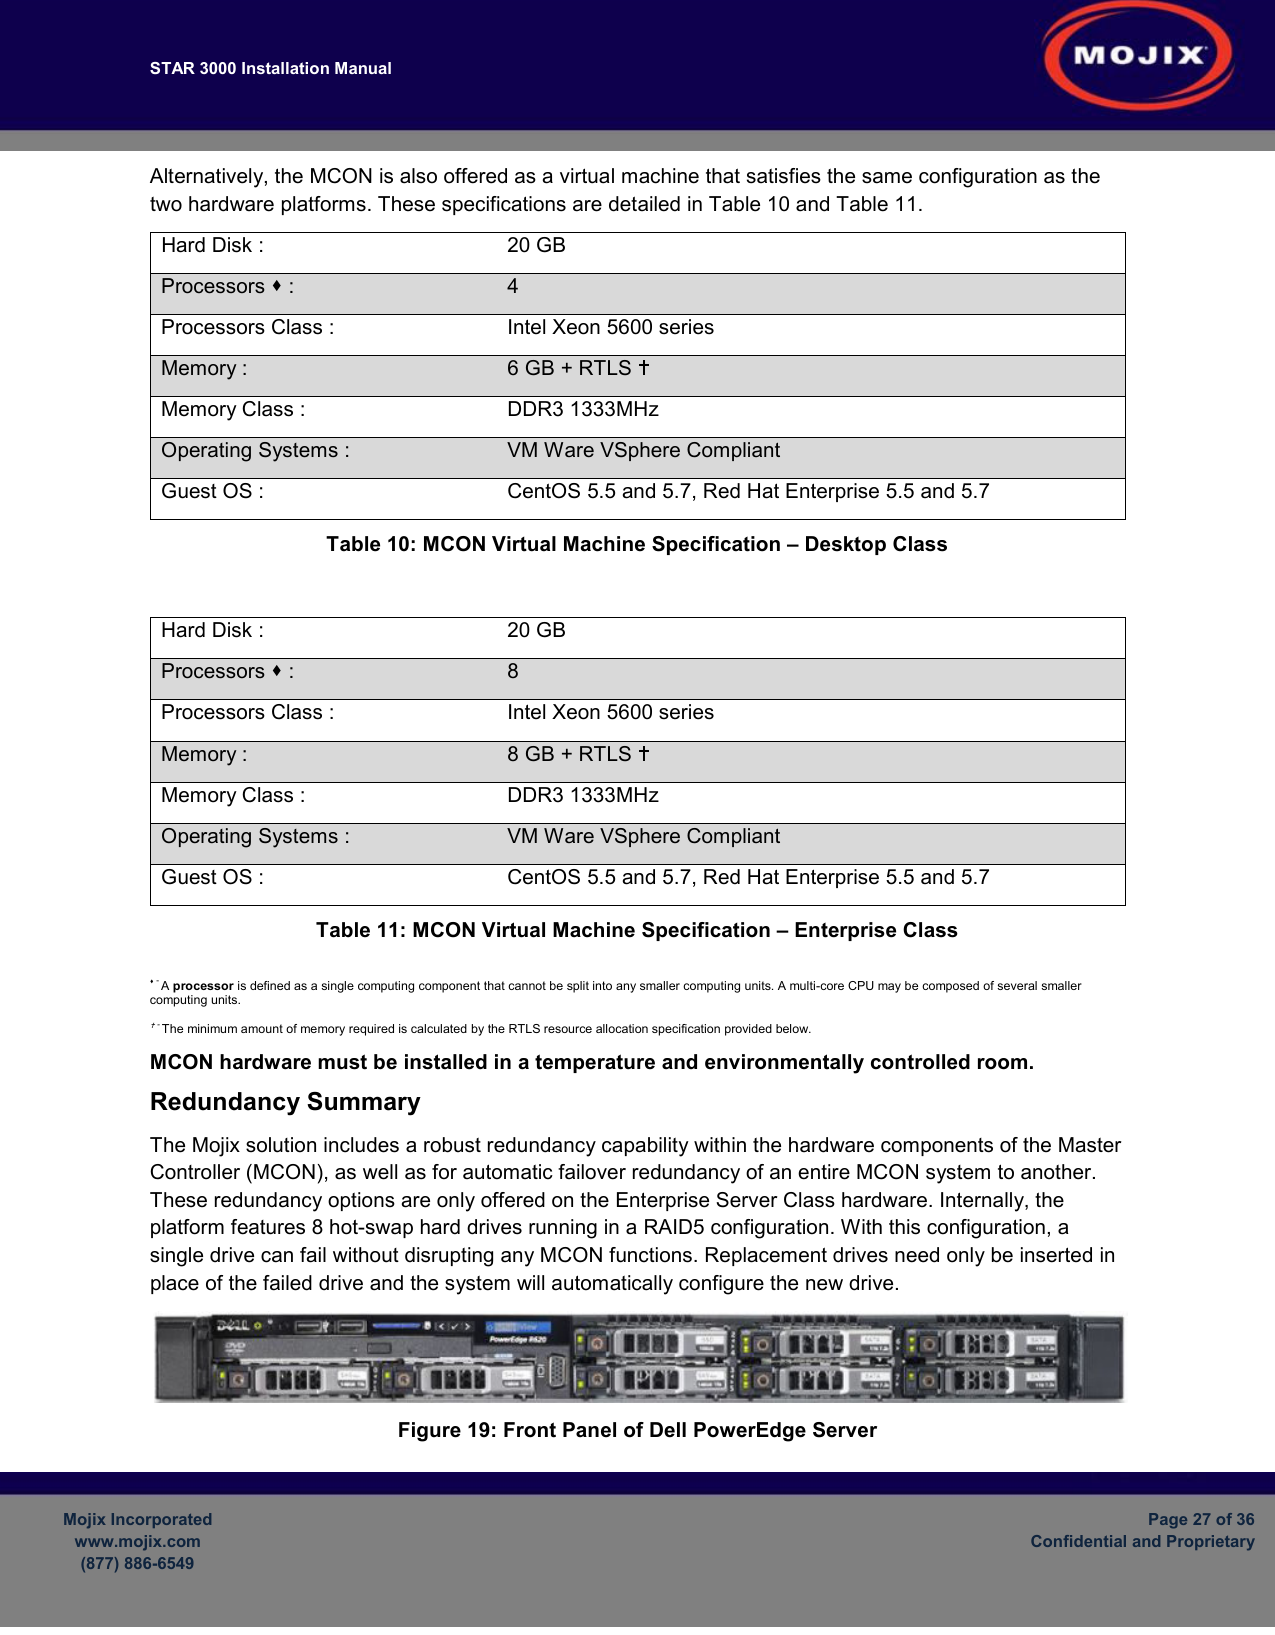 STAR 3000 Installation Manual         Mojix Incorporated www.mojix.com (877) 886-6549  Page 27 of 36 Confidential and Proprietary  Alternatively, the MCON is also offered as a virtual machine that satisfies the same configuration as the two hardware platforms. These specifications are detailed in Table 10 and Table 11. Hard Disk :  20 GB   Processors  :  4  Processors Class :  Intel Xeon 5600 series Memory :  6 GB + RTLS  Memory Class :  DDR3 1333MHz Operating Systems :  VM Ware VSphere Compliant  Guest OS :   CentOS 5.5 and 5.7, Red Hat Enterprise 5.5 and 5.7 Table 10: MCON Virtual Machine Specification – Desktop Class   Hard Disk :  20 GB   Processors  :  8 Processors Class :  Intel Xeon 5600 series Memory :  8 GB + RTLS  Memory Class :  DDR3 1333MHz Operating Systems :  VM Ware VSphere Compliant  Guest OS :   CentOS 5.5 and 5.7, Red Hat Enterprise 5.5 and 5.7 Table 11: MCON Virtual Machine Specification – Enterprise Class   - A processor is defined as a single computing component that cannot be split into any smaller computing units. A multi-core CPU may be composed of several smaller computing units.   - The minimum amount of memory required is calculated by the RTLS resource allocation specification provided below.   MCON hardware must be installed in a temperature and environmentally controlled room.  Redundancy Summary The Mojix solution includes a robust redundancy capability within the hardware components of the Master Controller (MCON), as well as for automatic failover redundancy of an entire MCON system to another. These redundancy options are only offered on the Enterprise Server Class hardware. Internally, the platform features 8 hot-swap hard drives running in a RAID5 configuration. With this configuration, a single drive can fail without disrupting any MCON functions. Replacement drives need only be inserted in place of the failed drive and the system will automatically configure the new drive.  Figure 19: Front Panel of Dell PowerEdge Server 